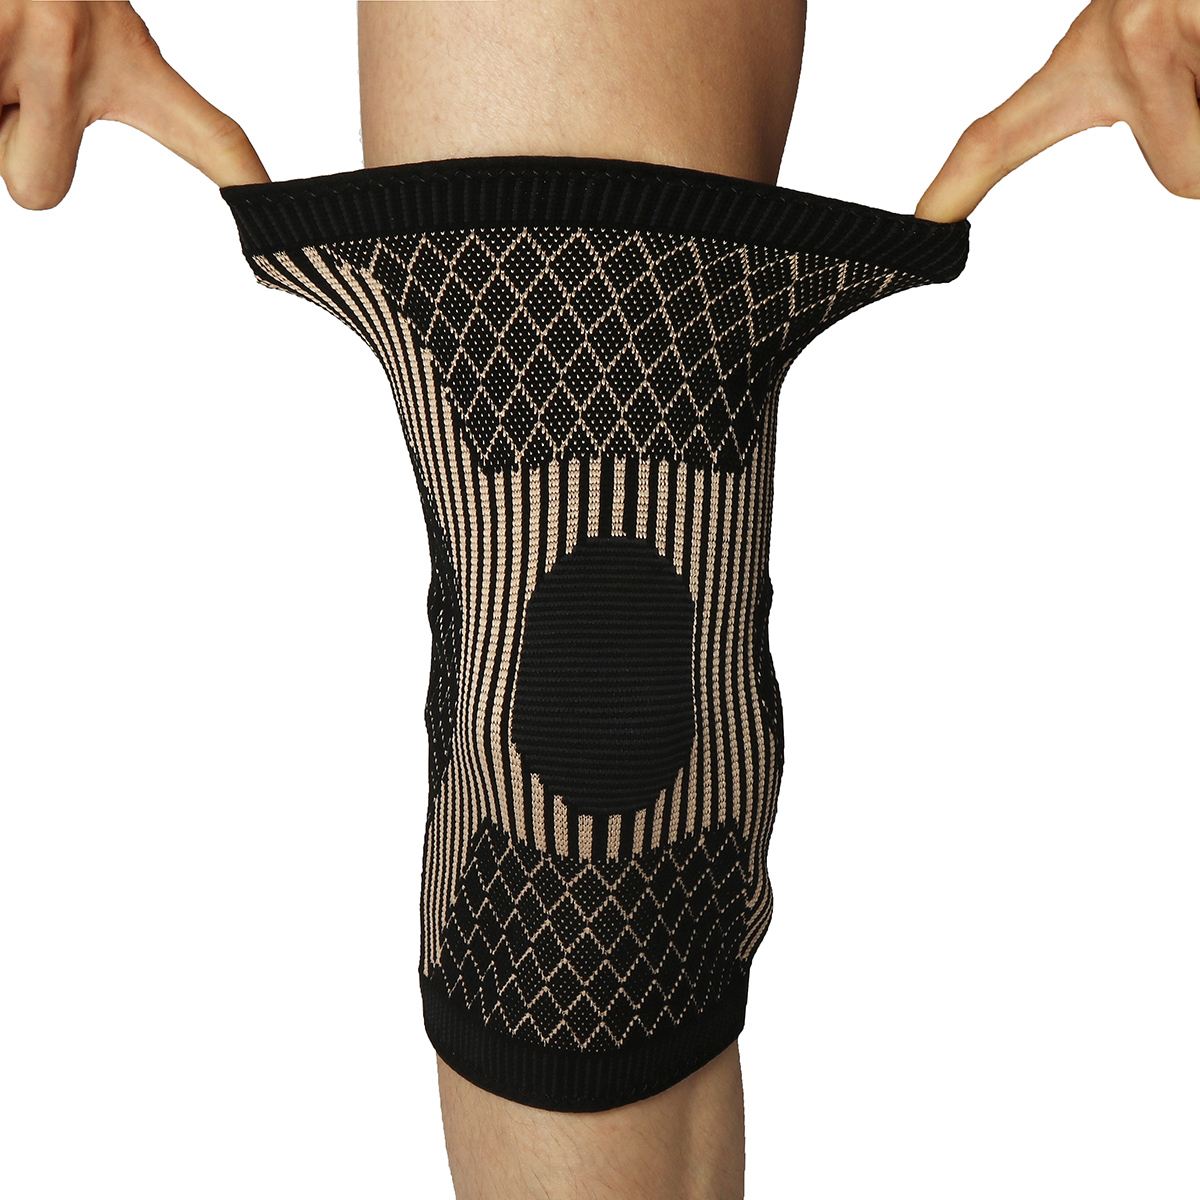 Copper-Infused-Knee-Support-Brace-Patella-Arthritis-Leg-Support-Joint-Compression-Sleeve-1537291-8